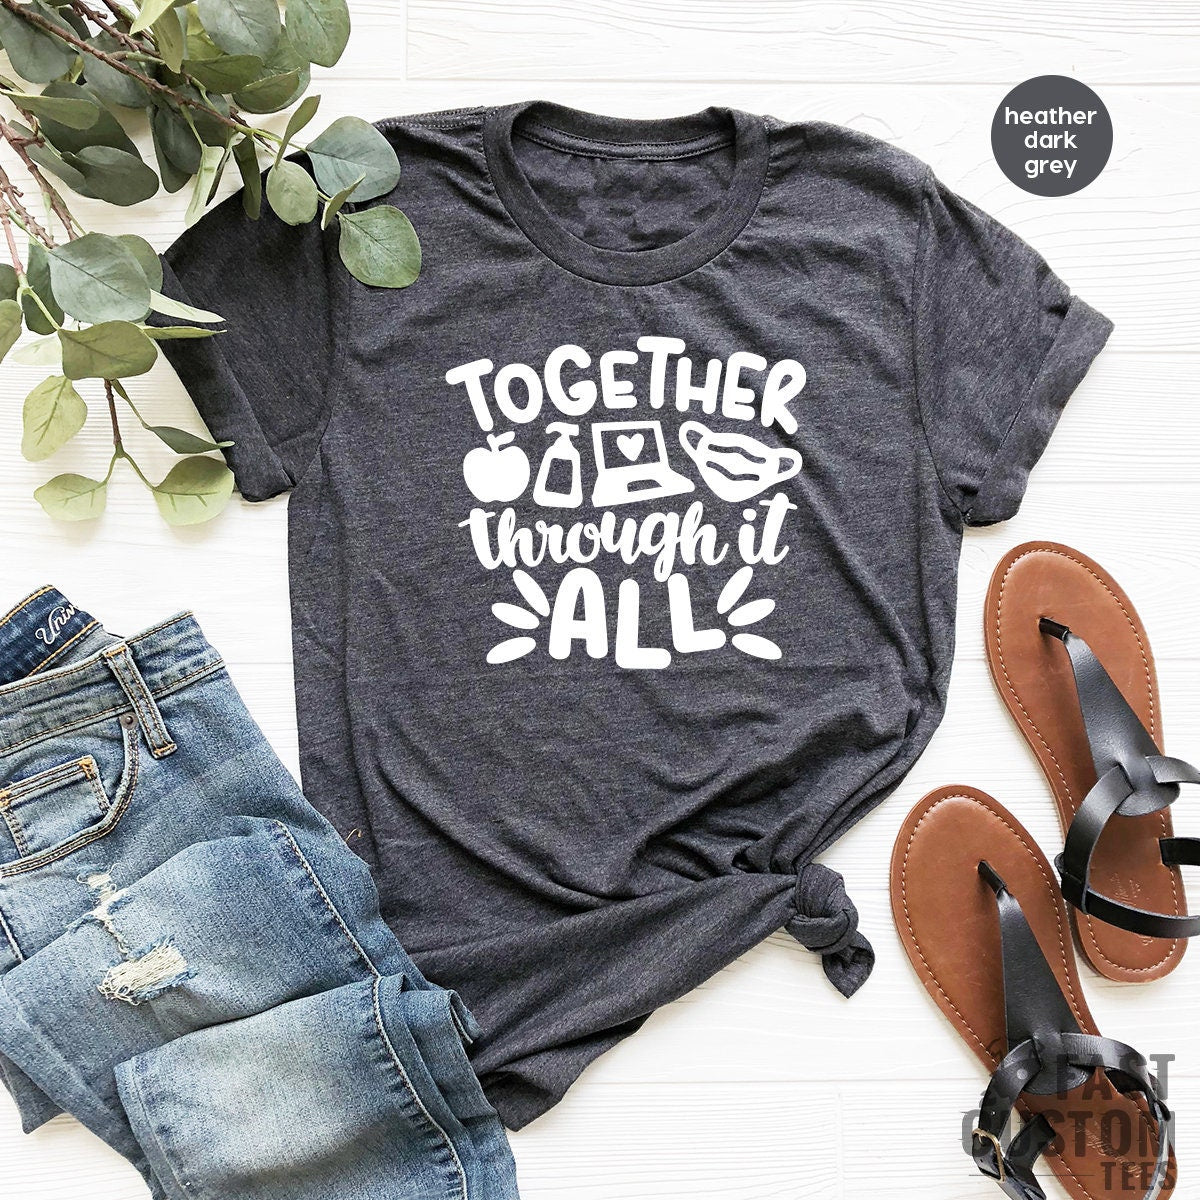 Online School Tee, Together Through It All, Distance Learning Tee, Gift For Teachers, Funny Teacher Tee, Teacher Gift - Fastdeliverytees.com